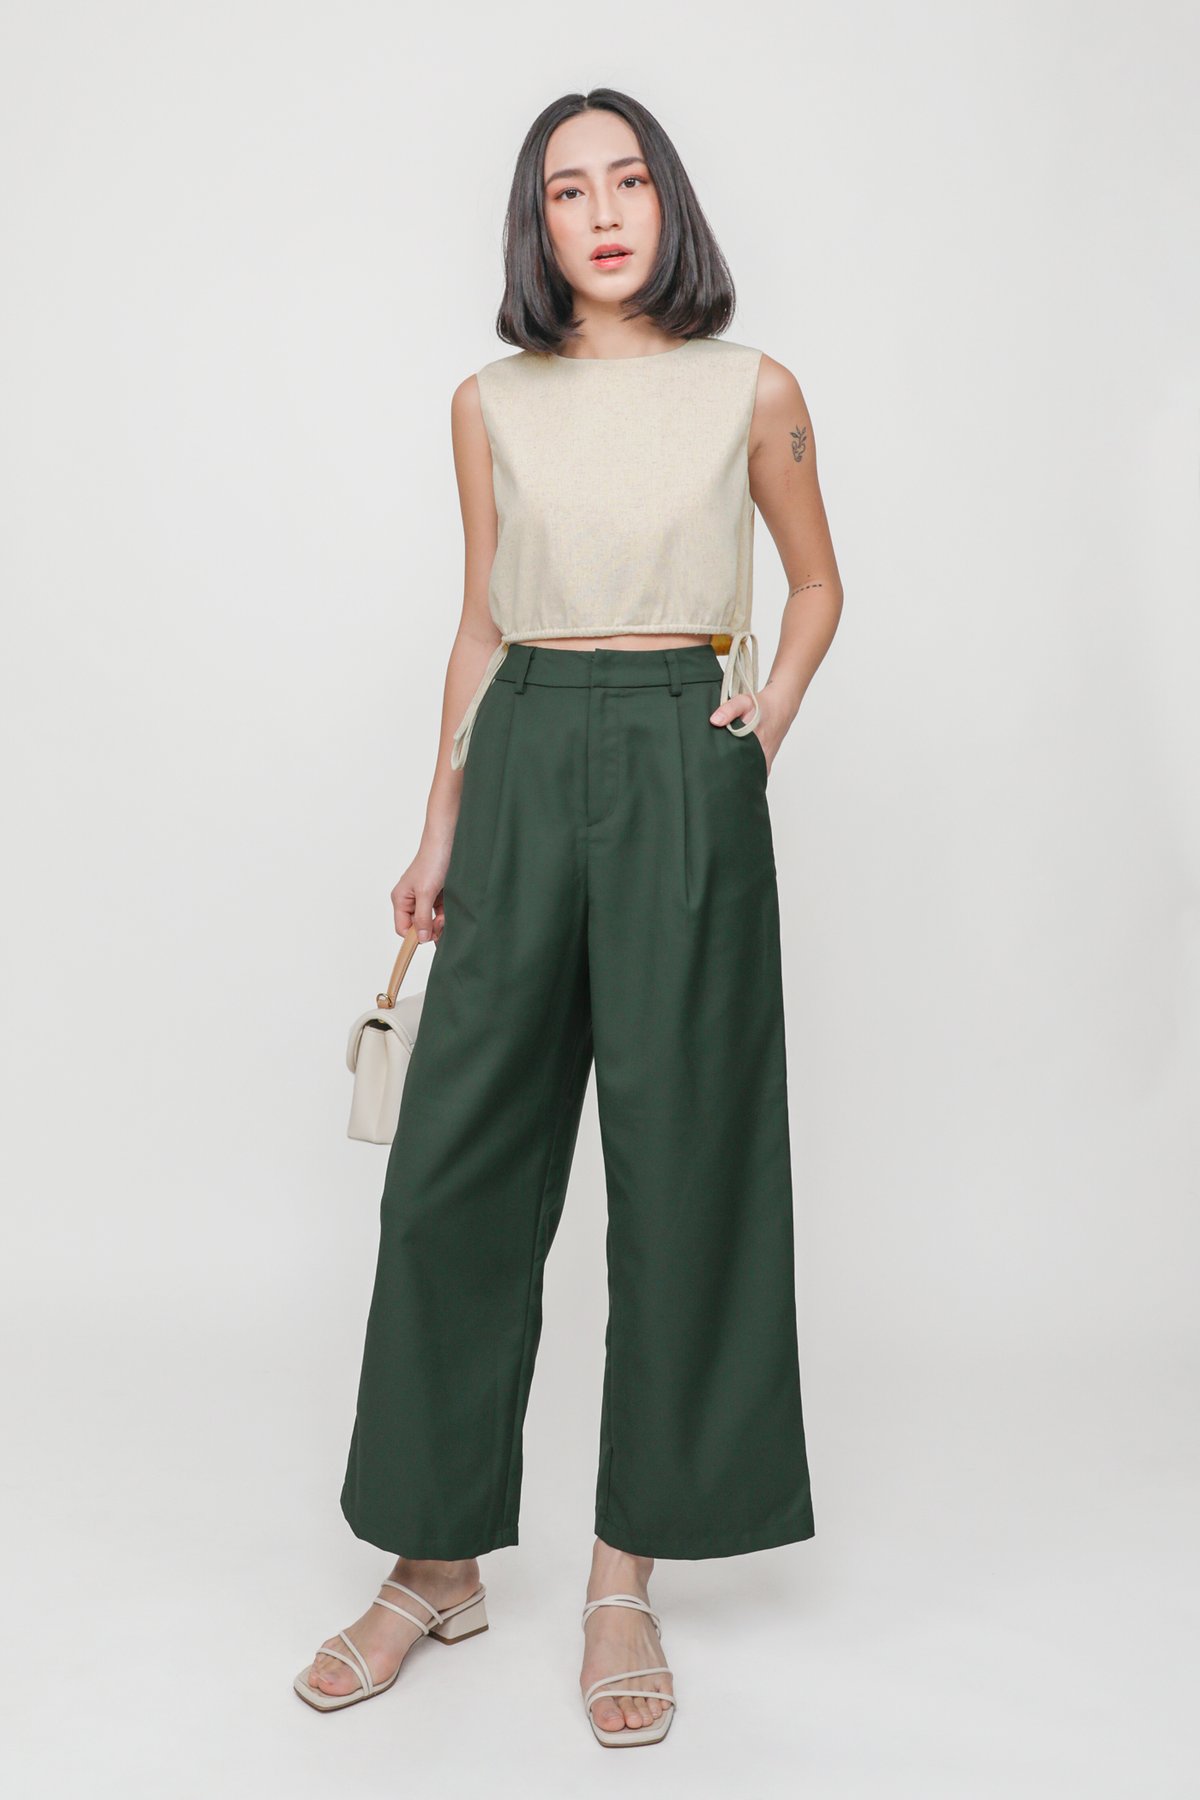 Raegan Hooked Front Pants (Forest)